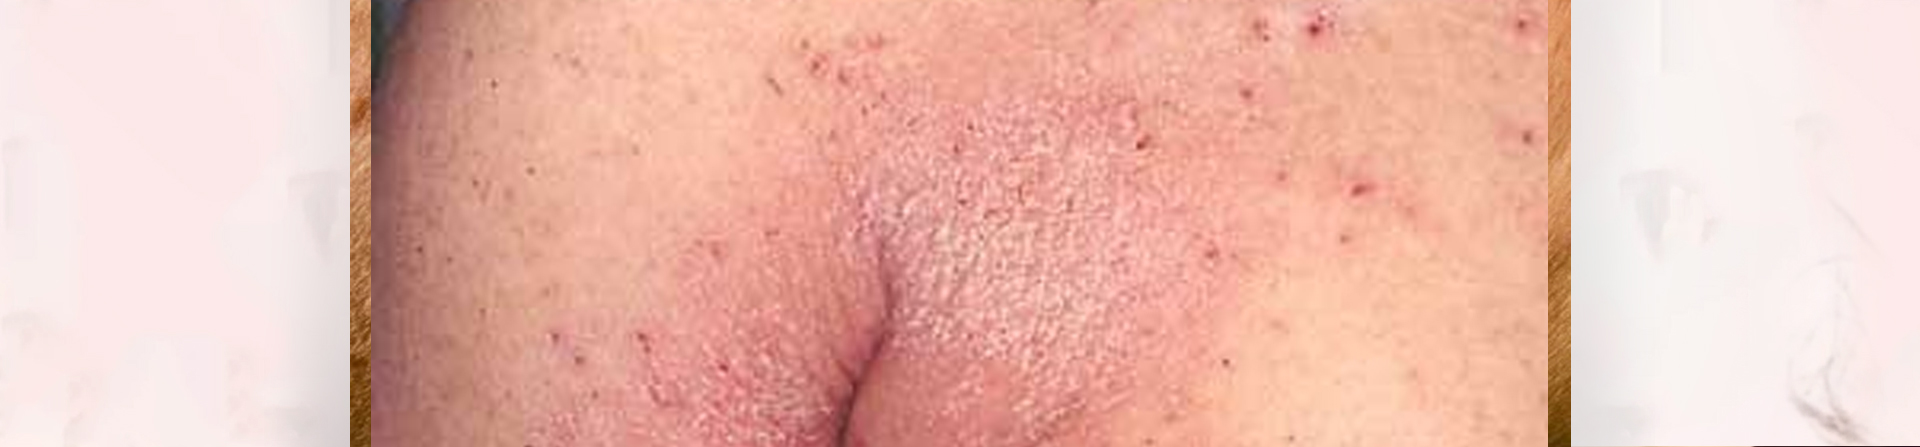 Best Scabies Treatment Clinic in Bhubaneswar